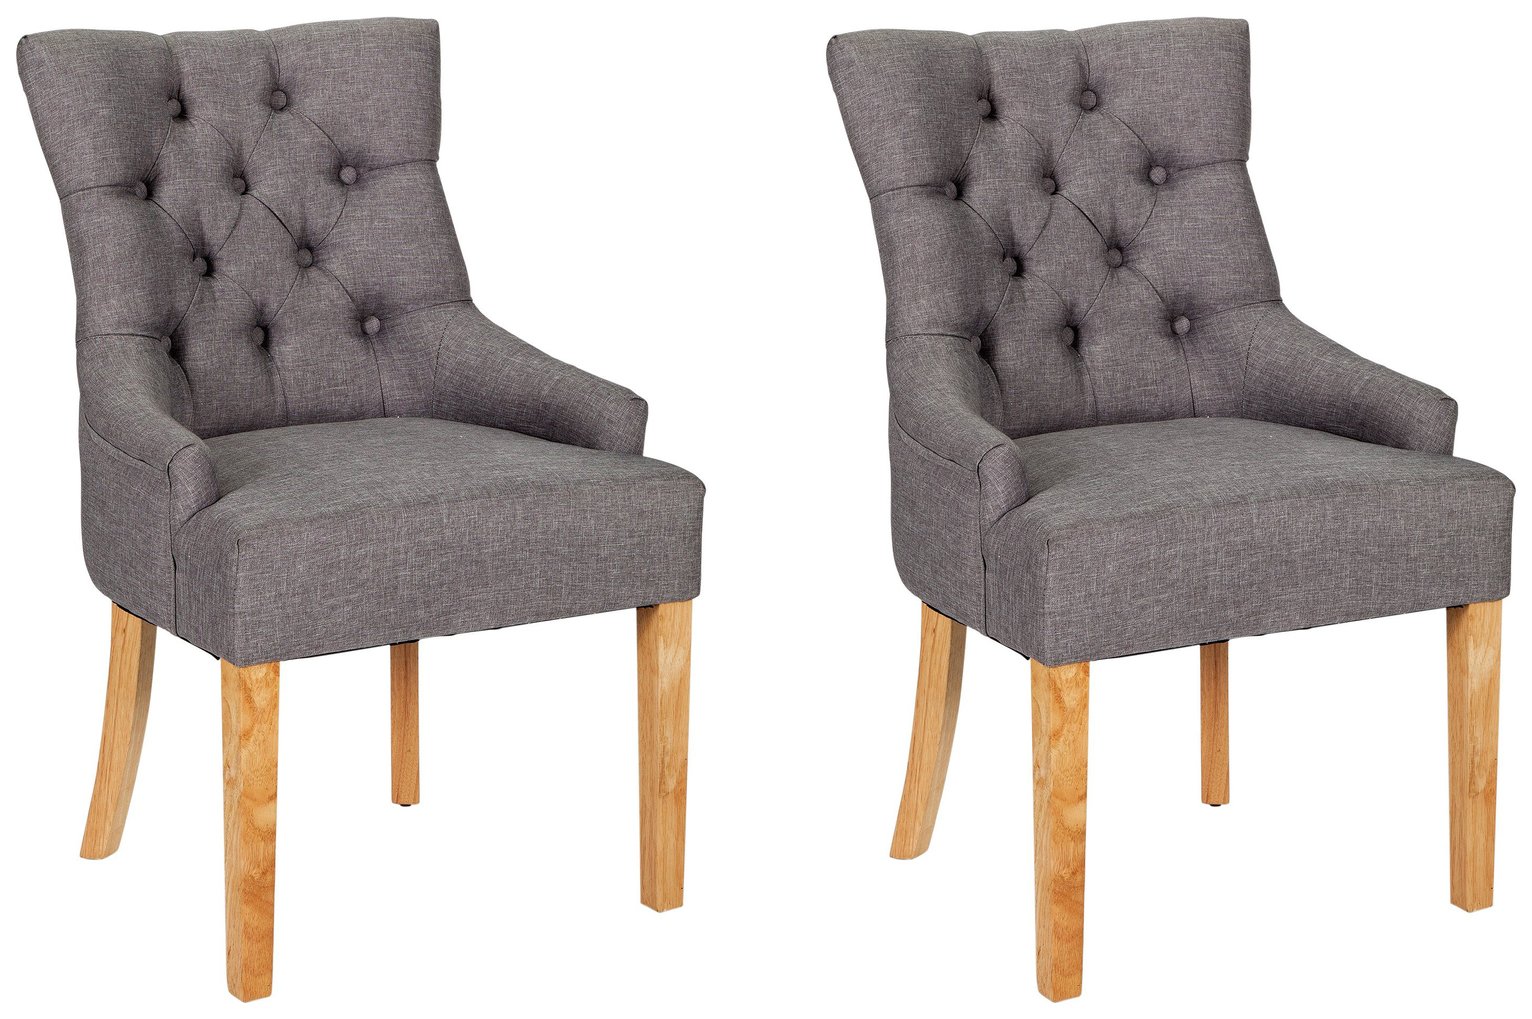 Argos Home Pair Of Cherwell Dining Chairs Reviews